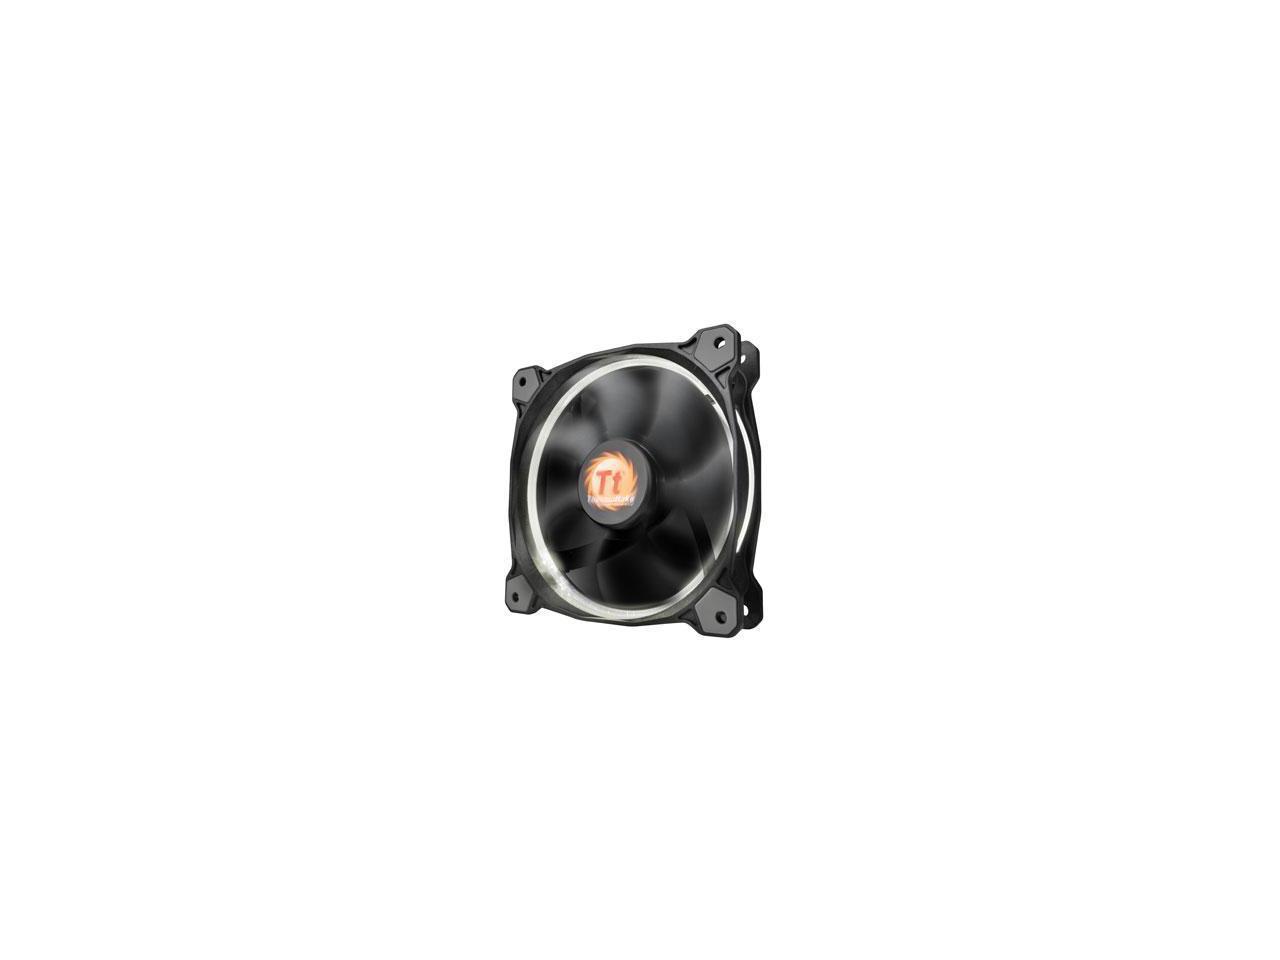 Thermaltake Riing 12 Series White Led - CL-F038-PL12WT-A